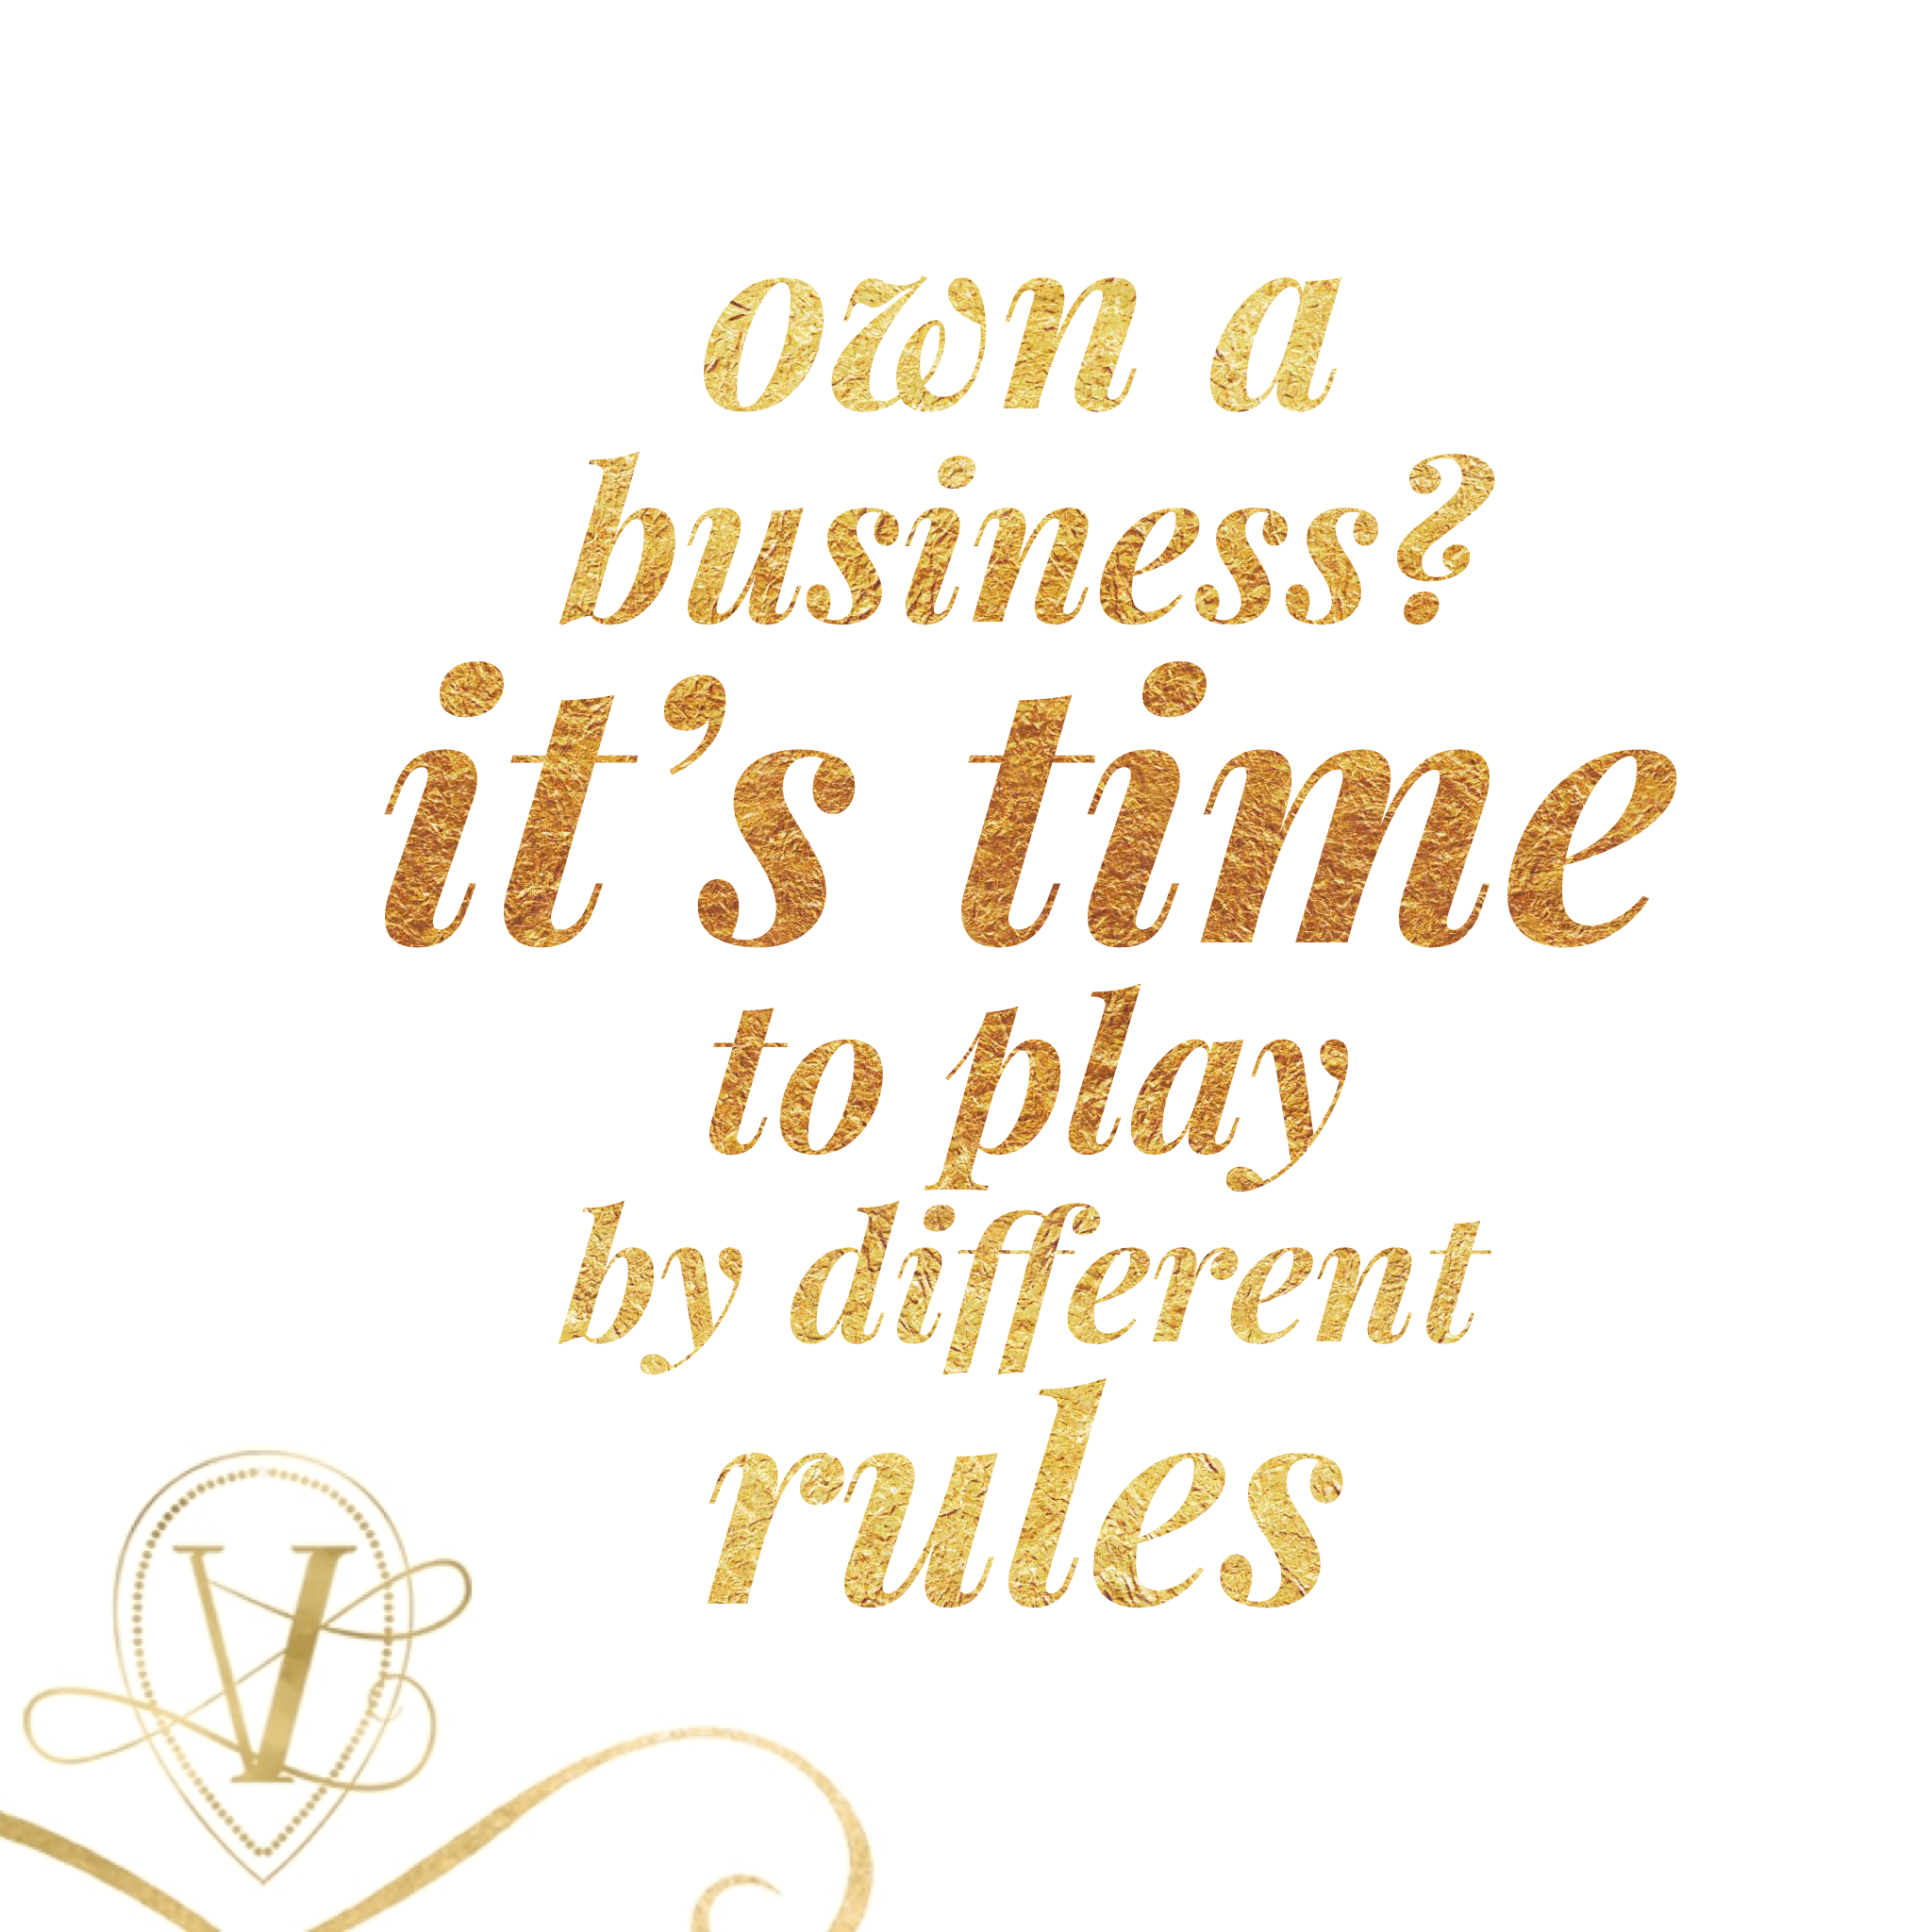 own a business? it's time to play by different rules